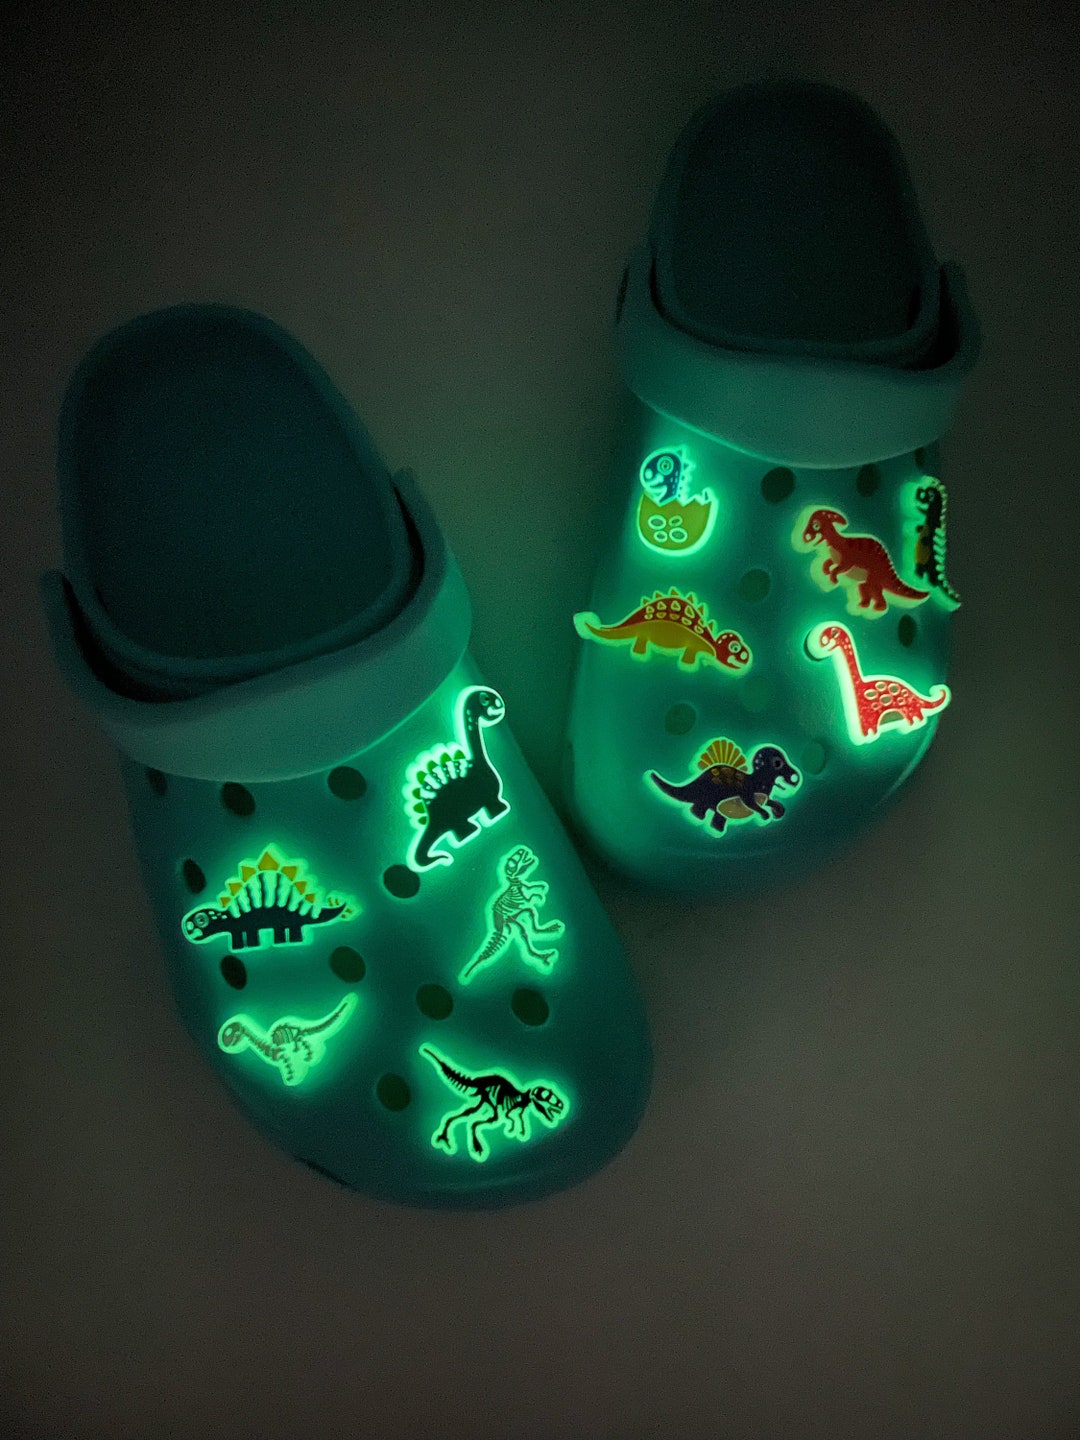  2 Headlights for Croc, Croc Lights, Shoes Headlights Lights, Croc  Accessories for Adults and Kids, Glow in The Dark Croc Charm (Black) :  Tools & Home Improvement